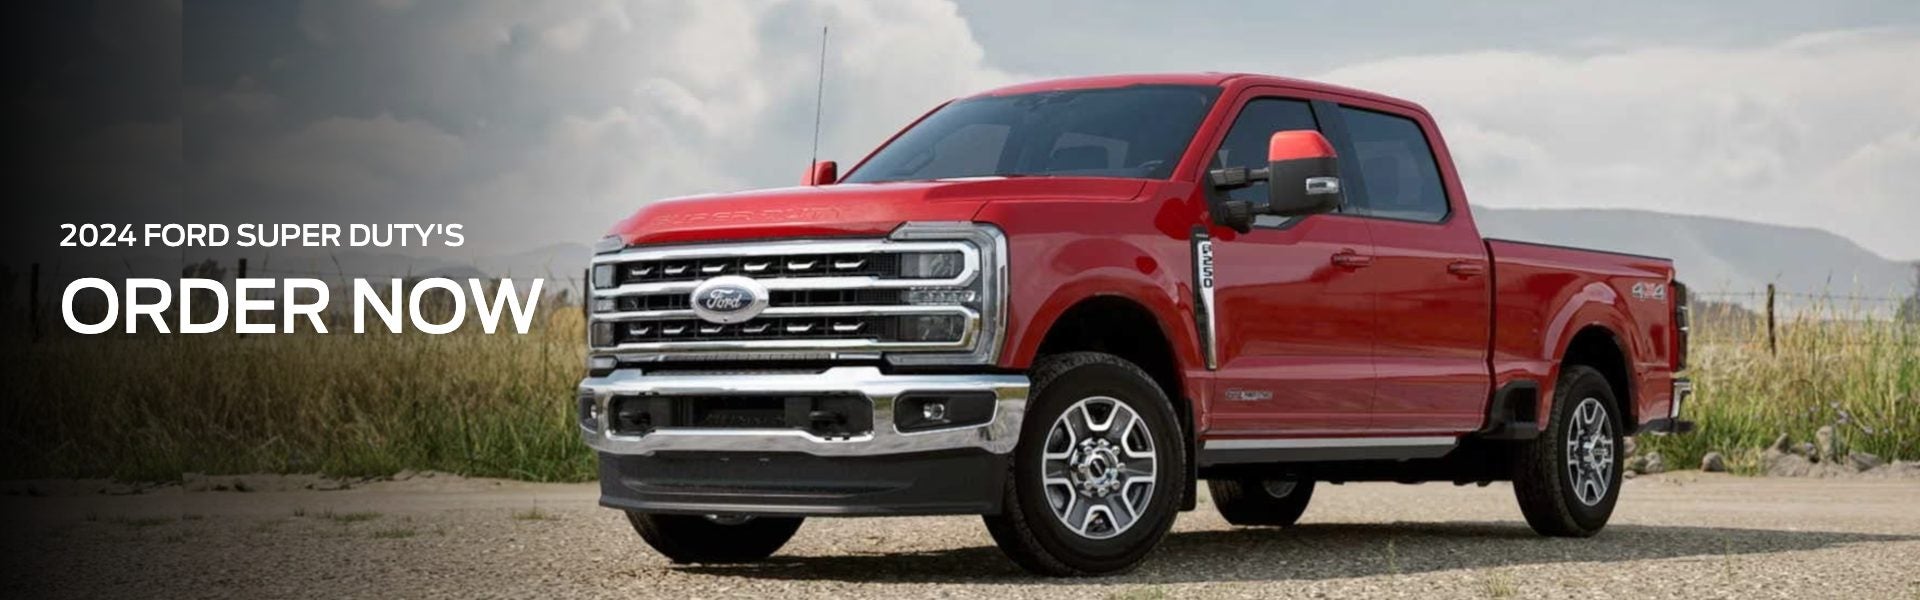 2024 ford super duty's order now banner with truck image